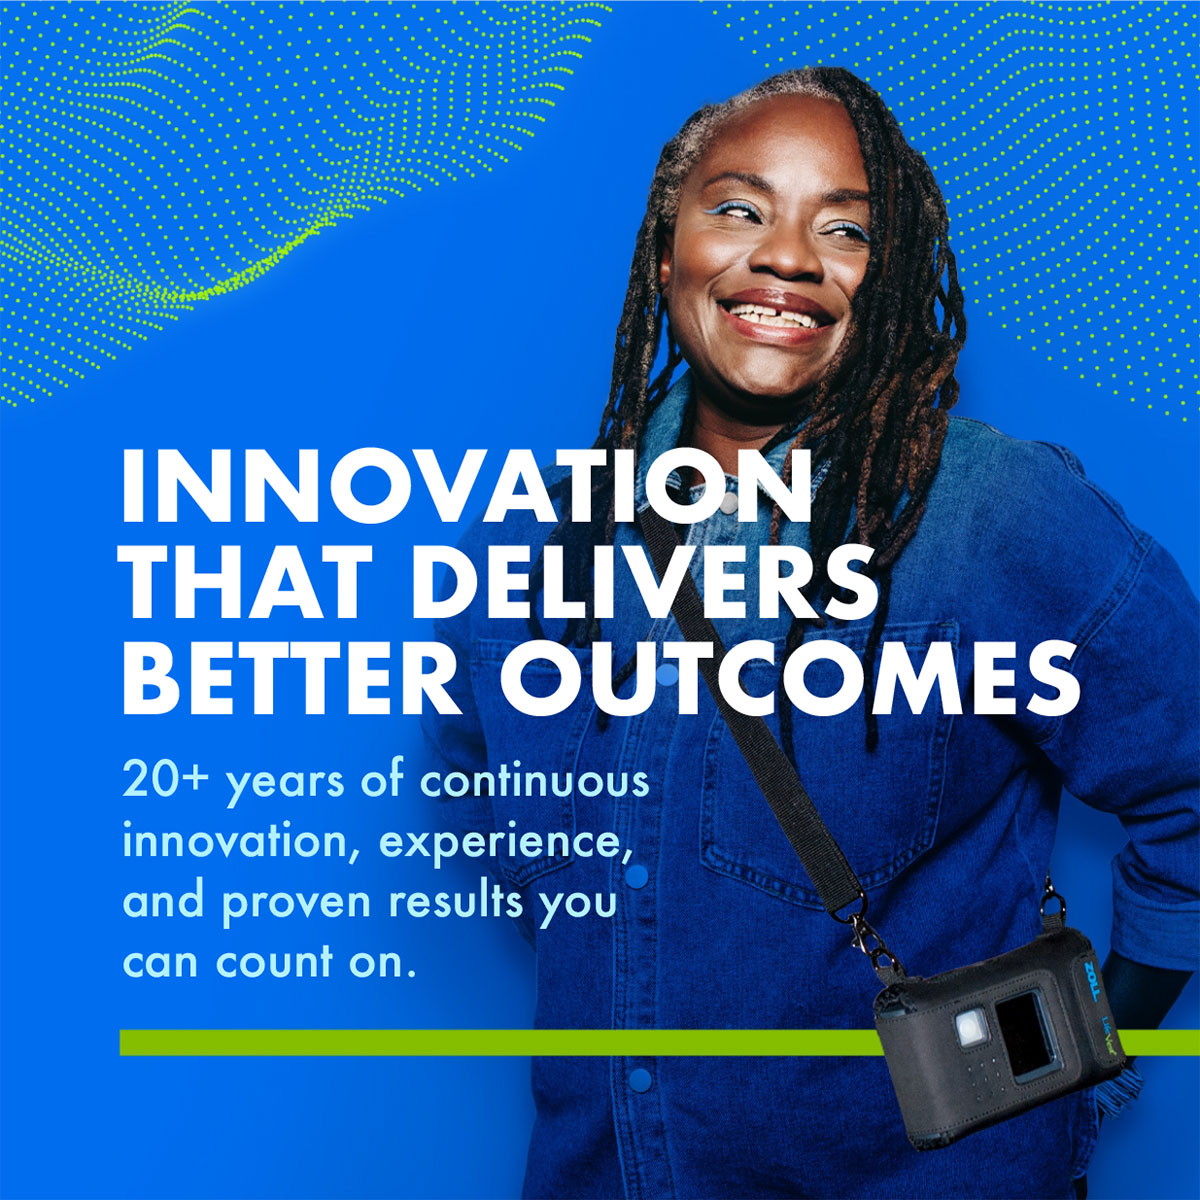 Innovation that delivers better outcomes. 20+ years of continuous innovation, experience, and proven results you can count on.